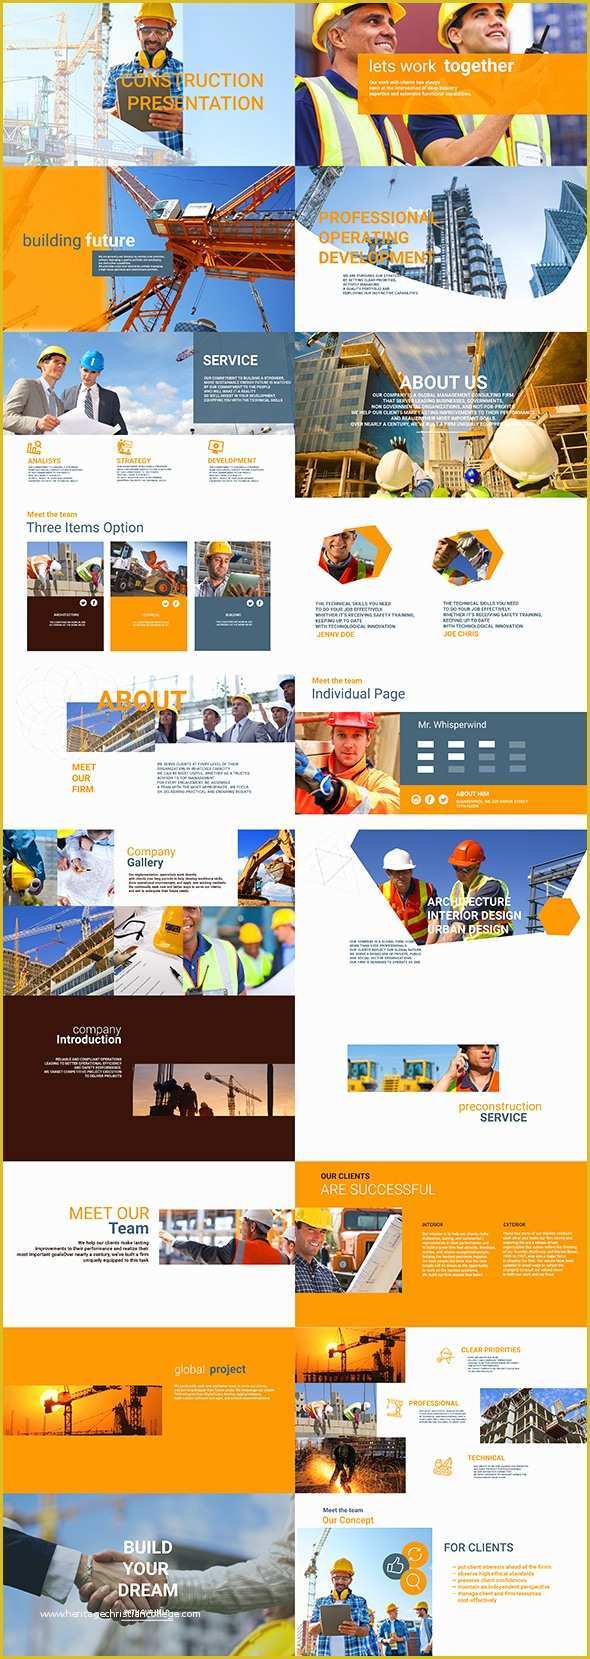 Free after Effect Promo Template Of Construction Presentation – Building Promo Industrial